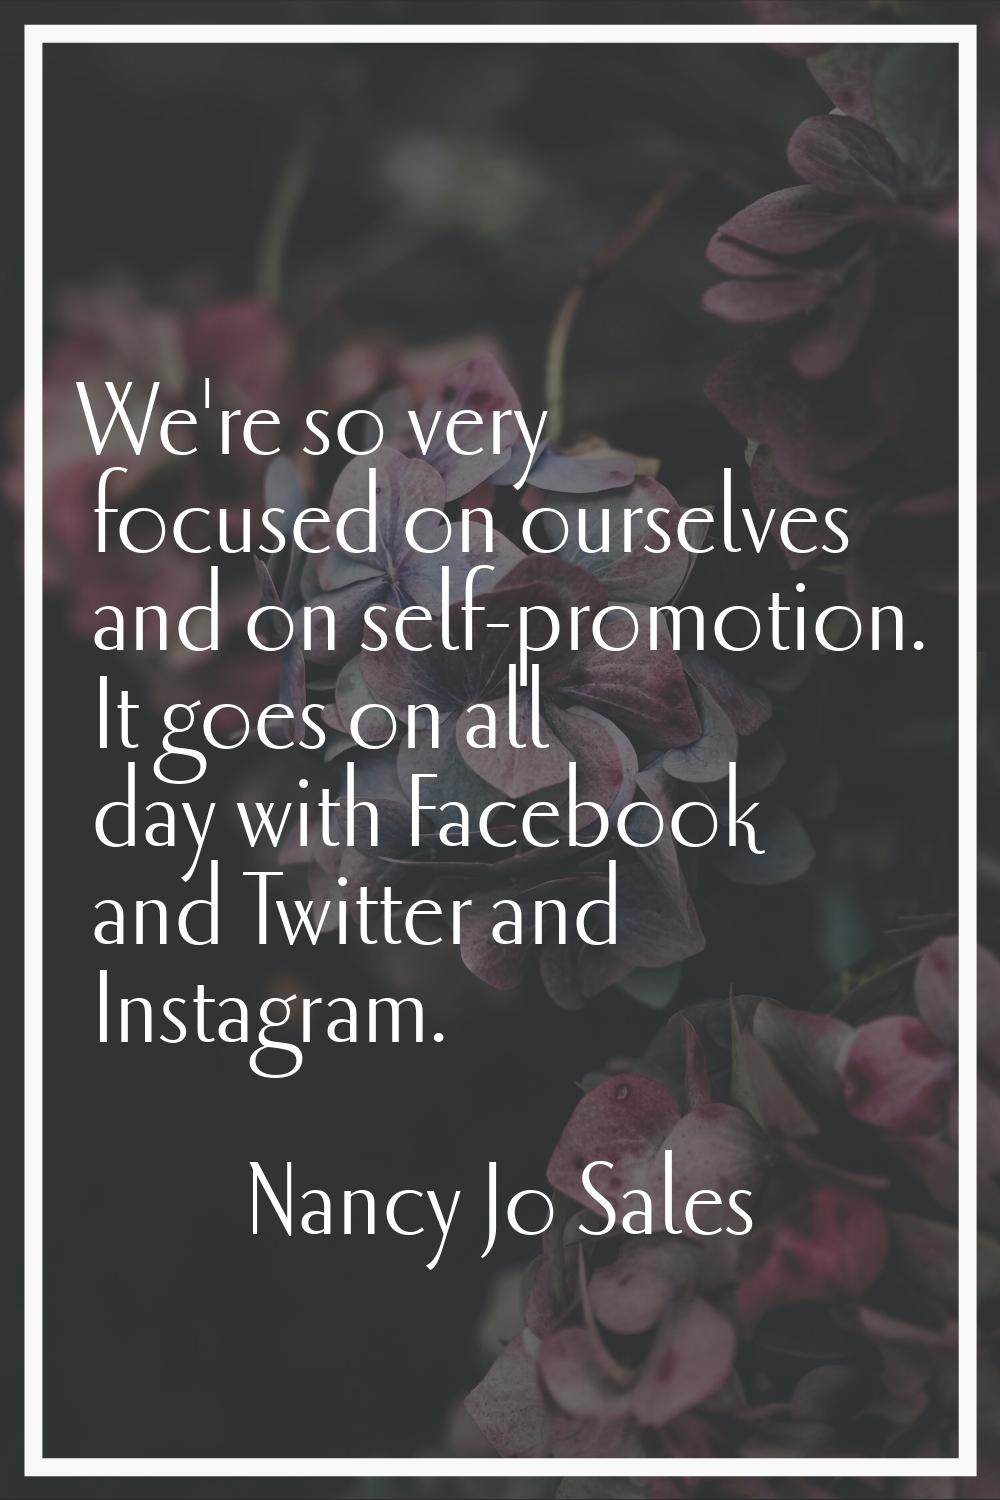 We're so very focused on ourselves and on self-promotion. It goes on all day with Facebook and Twit